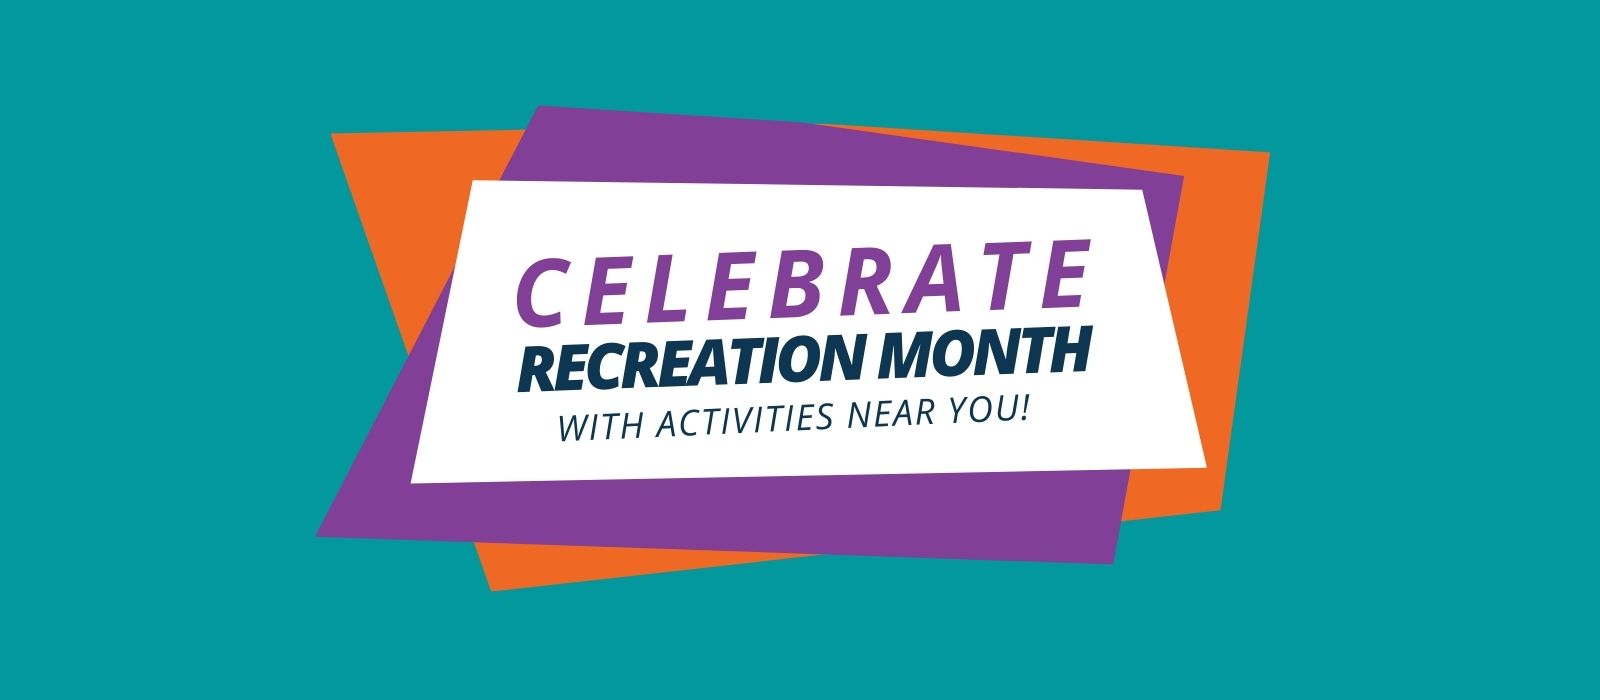 The words "celebrate recreation month with activities near you" on a teal background